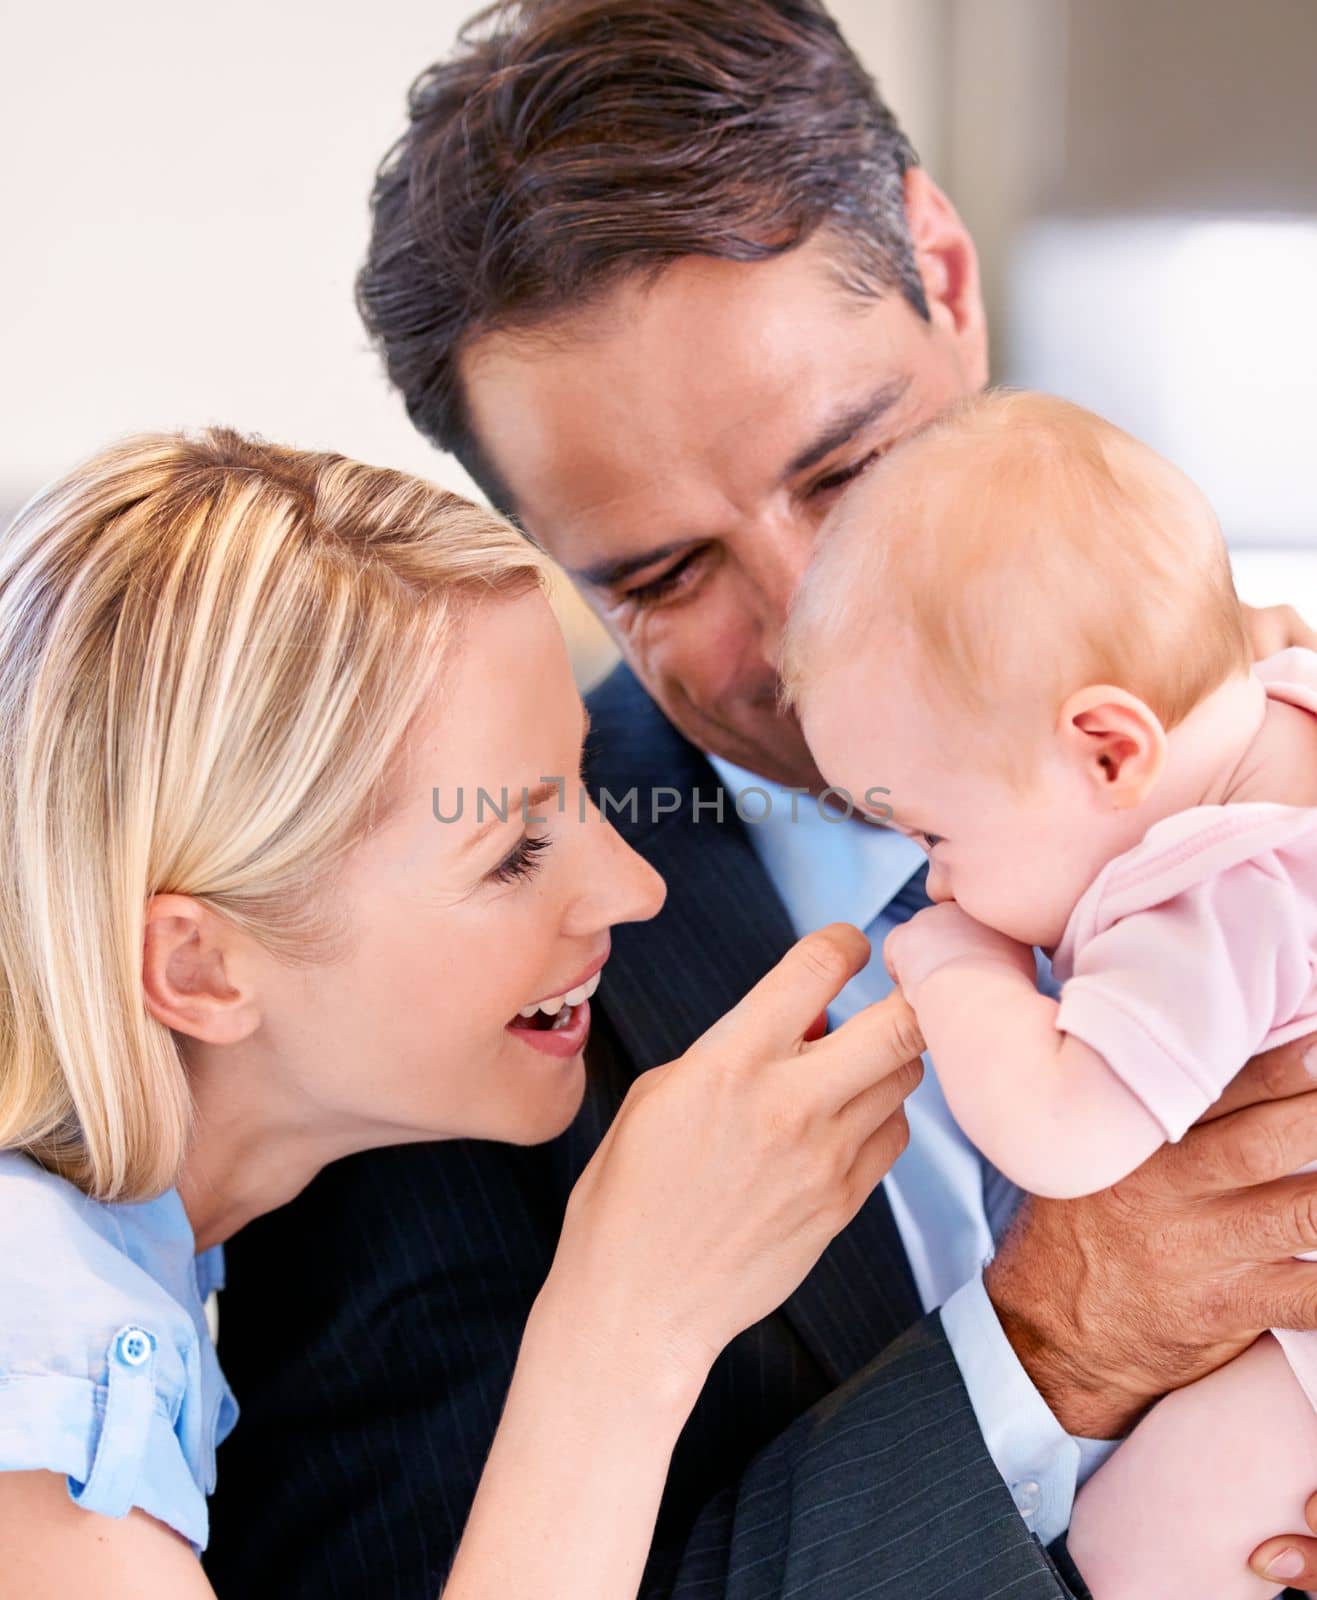 They both love her endlessly. Young couple doting over their cute baby girl